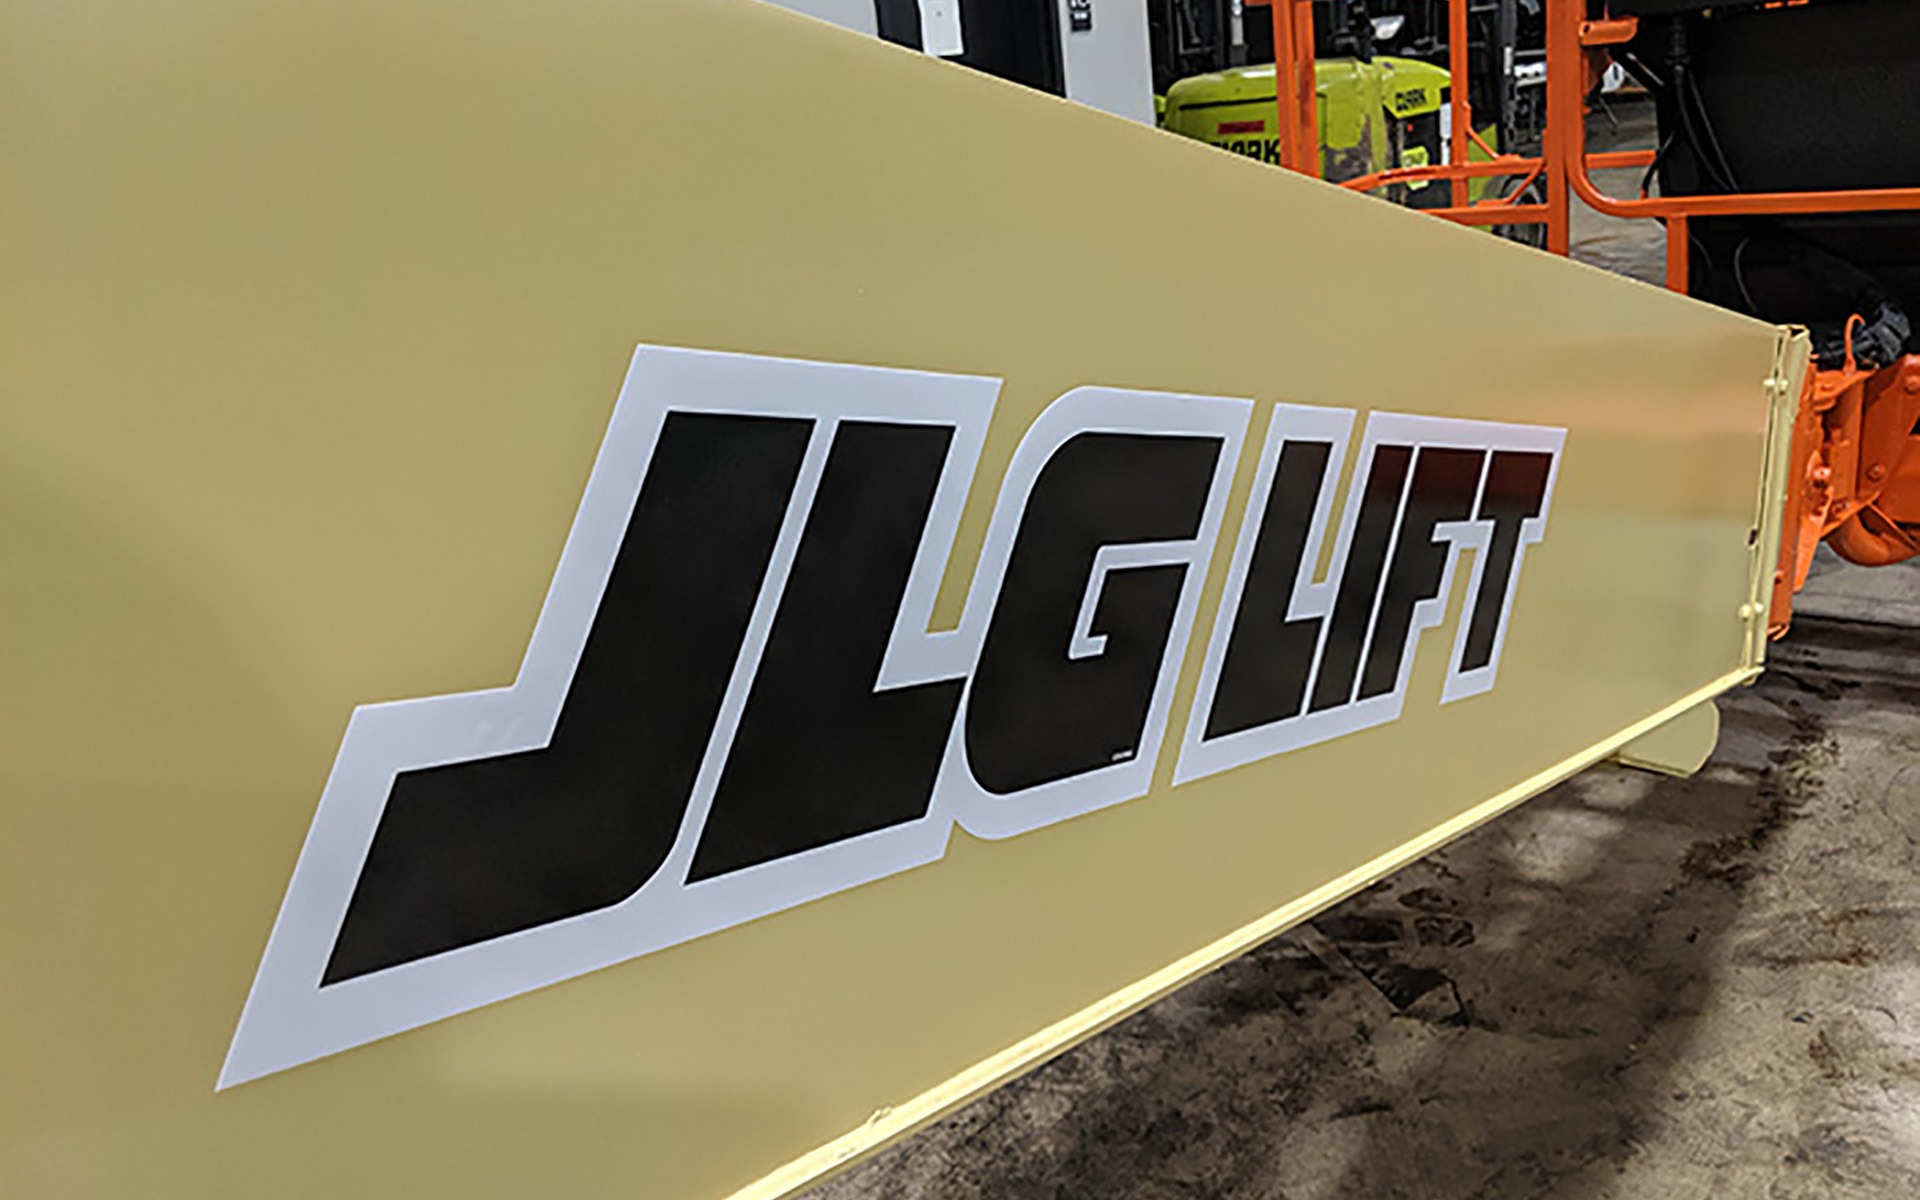 Used 1999 JLG 600S  | Cary, IL